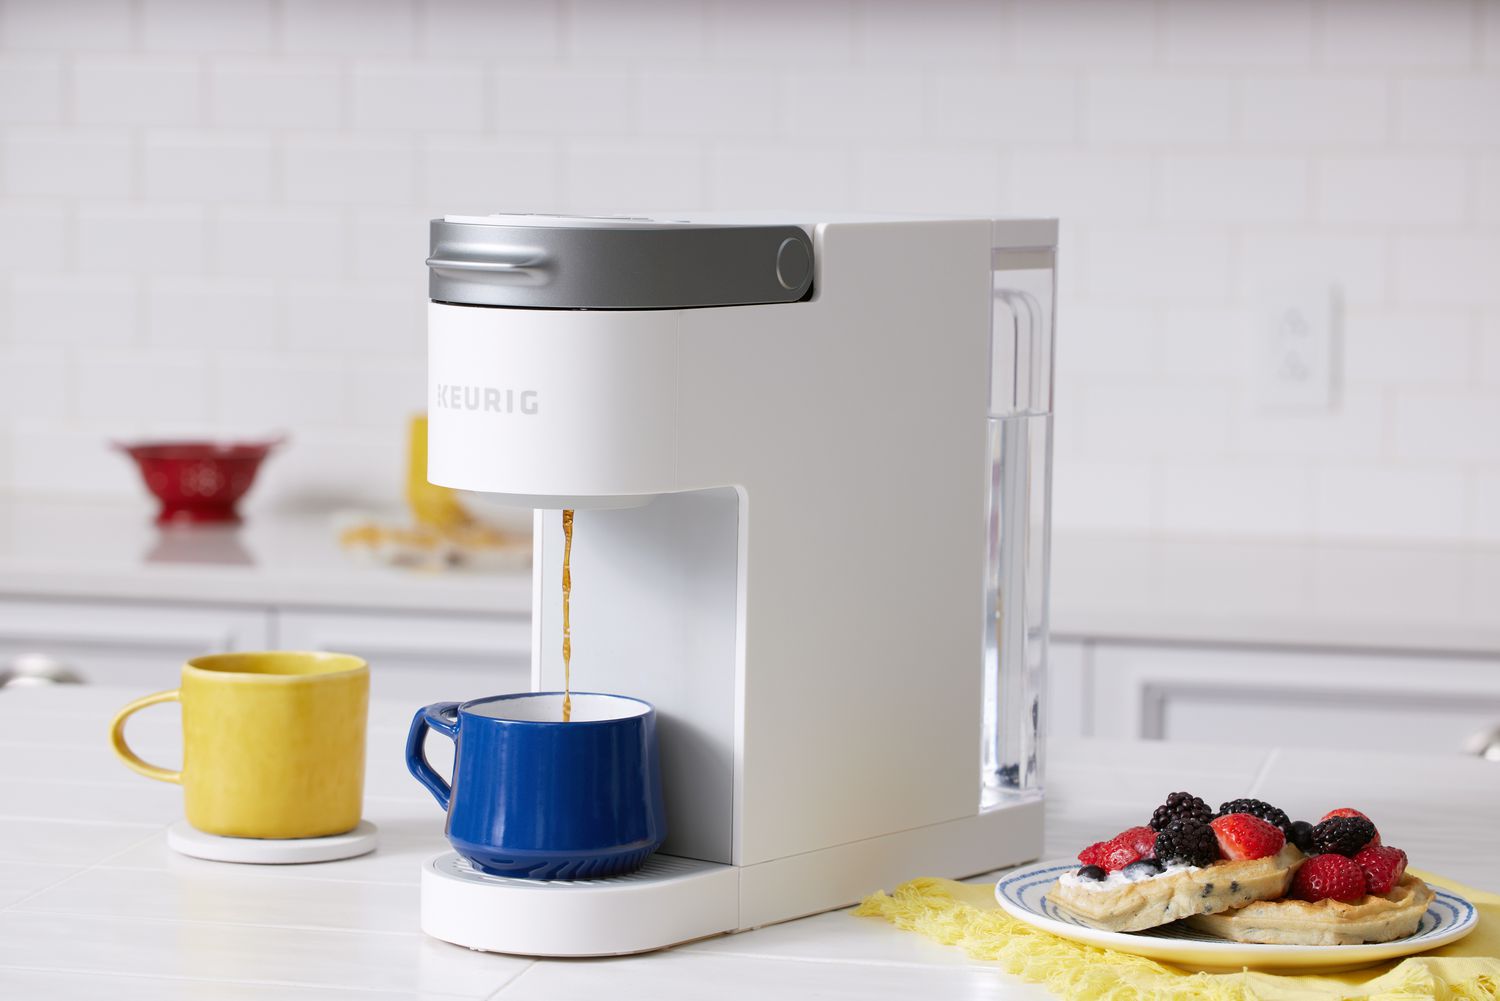 Keurig K-Slim Single Serve Coffee Maker pouring coffee into a cup next to a plate of pancakes